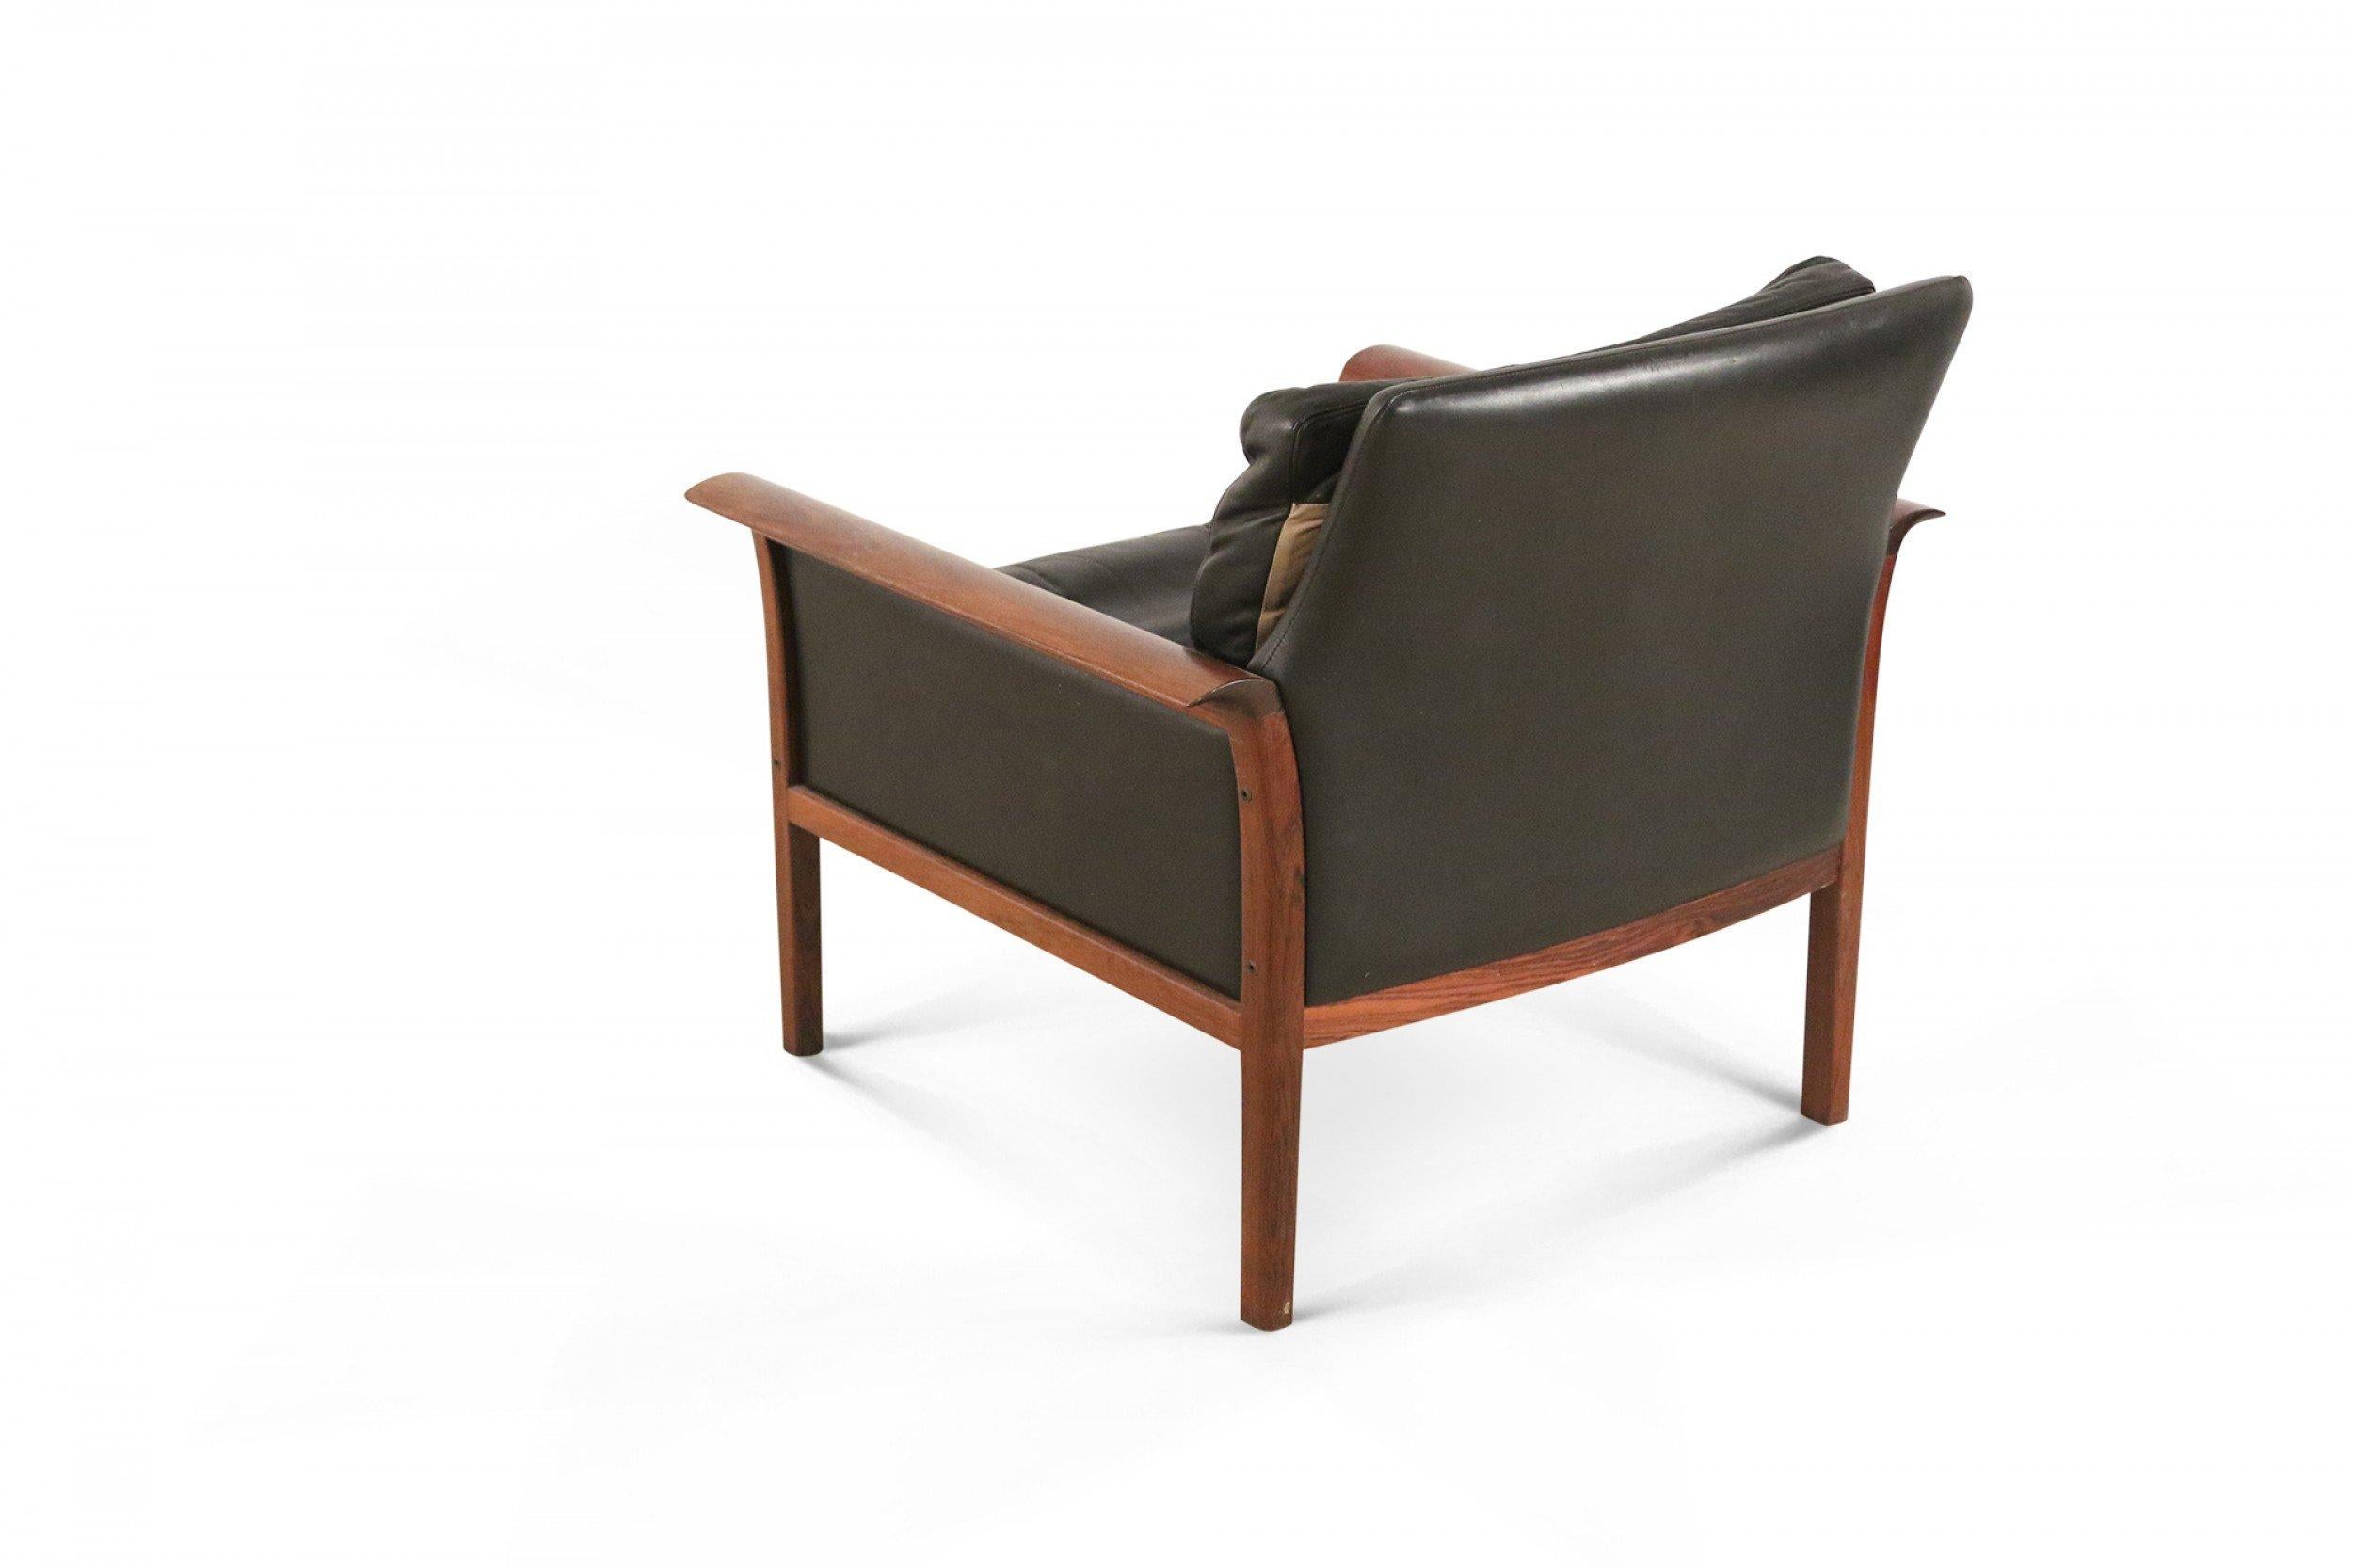 Pair of mid-century norwegian armchairs with rosewood frames and armrests and black leather upholstery. (Knut Saeter for Vatner Mobler) (priced as pair).
 